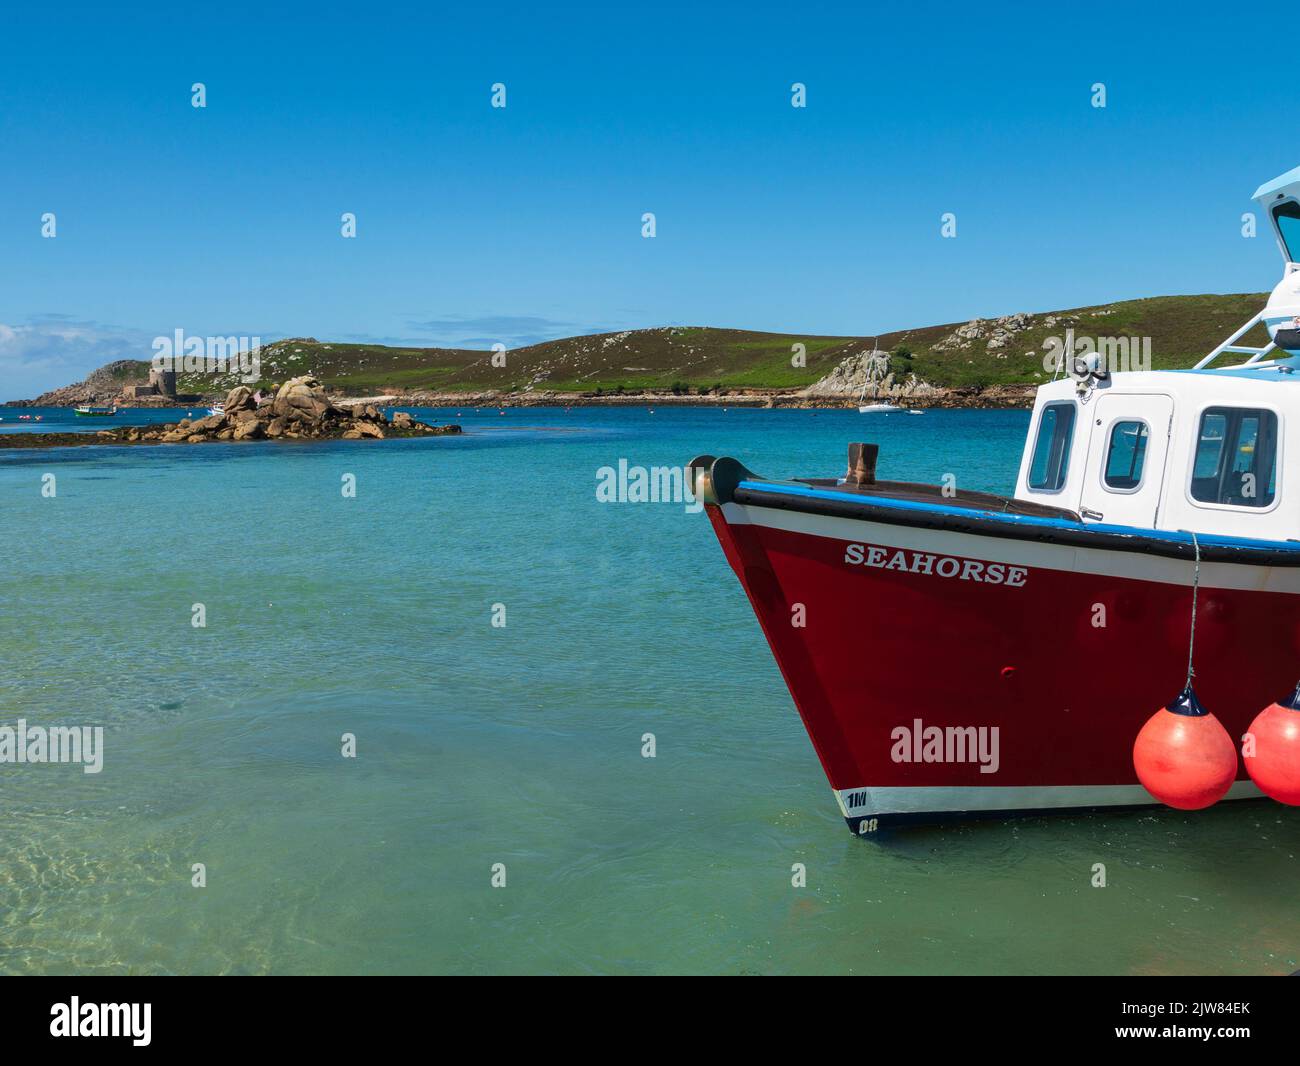 Seahorse inter-island boat on the quay, Bryher, Isles of Scilly, Cornwall, England, UK. Stock Photo